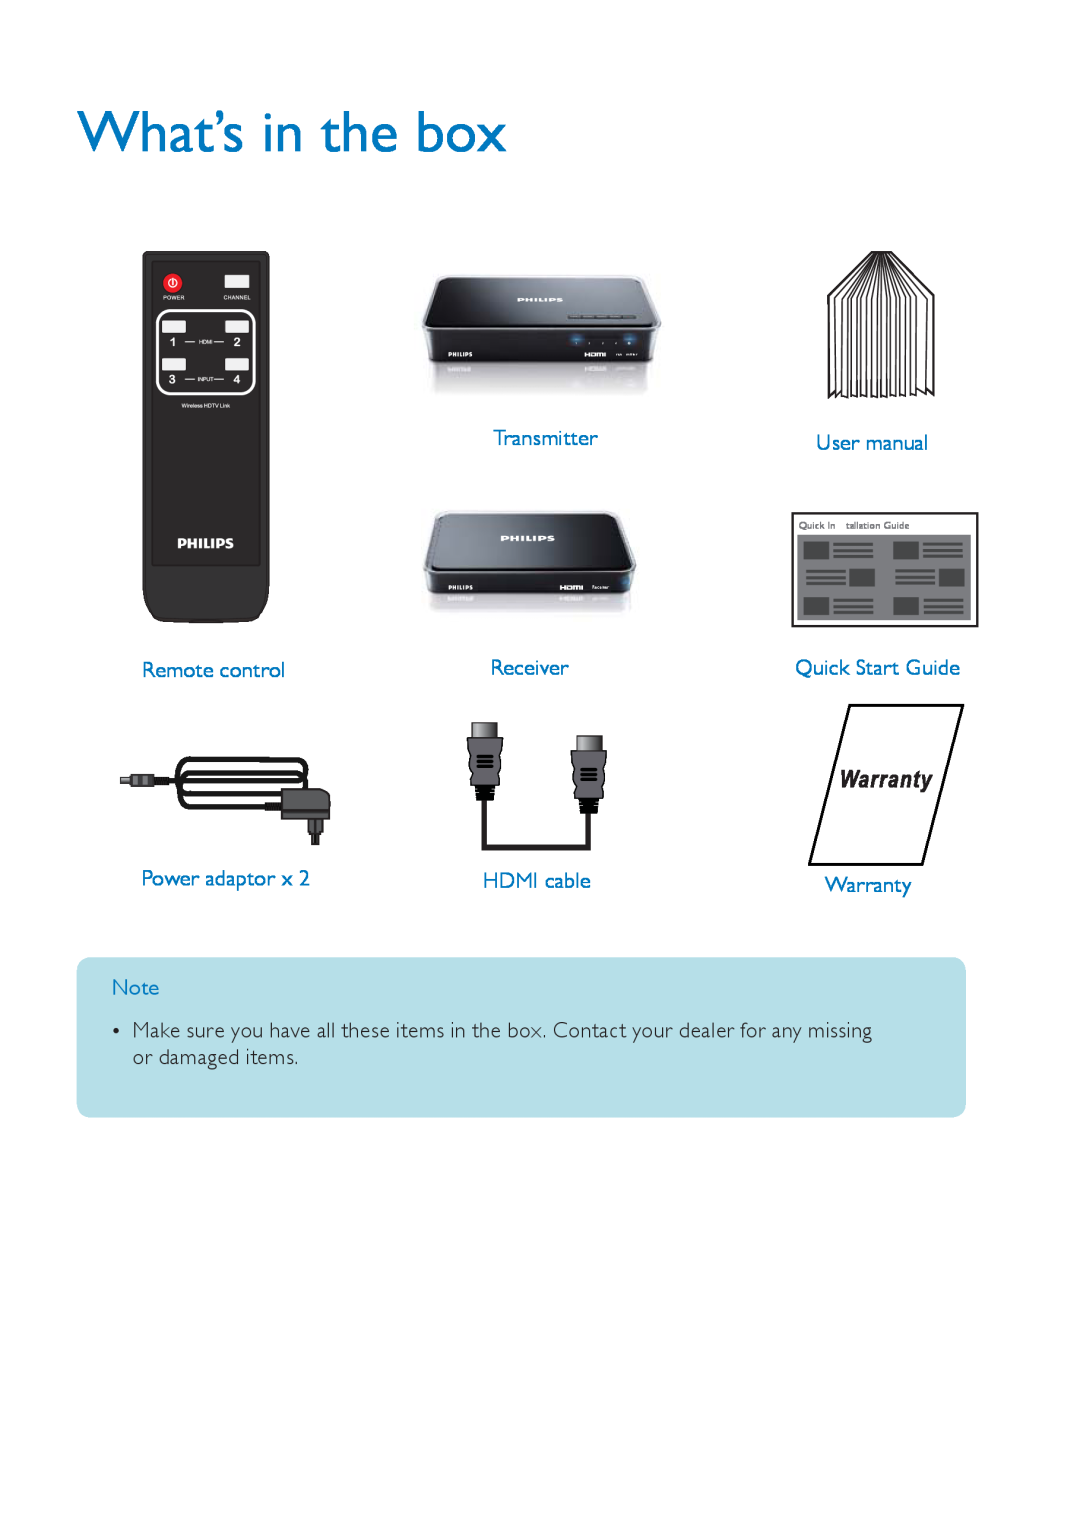 Philips SWW1800/27 What’s in the box, Transmitter, Remote control, Quick Start Guide, Power adaptor, HDMI cable, Warranty 